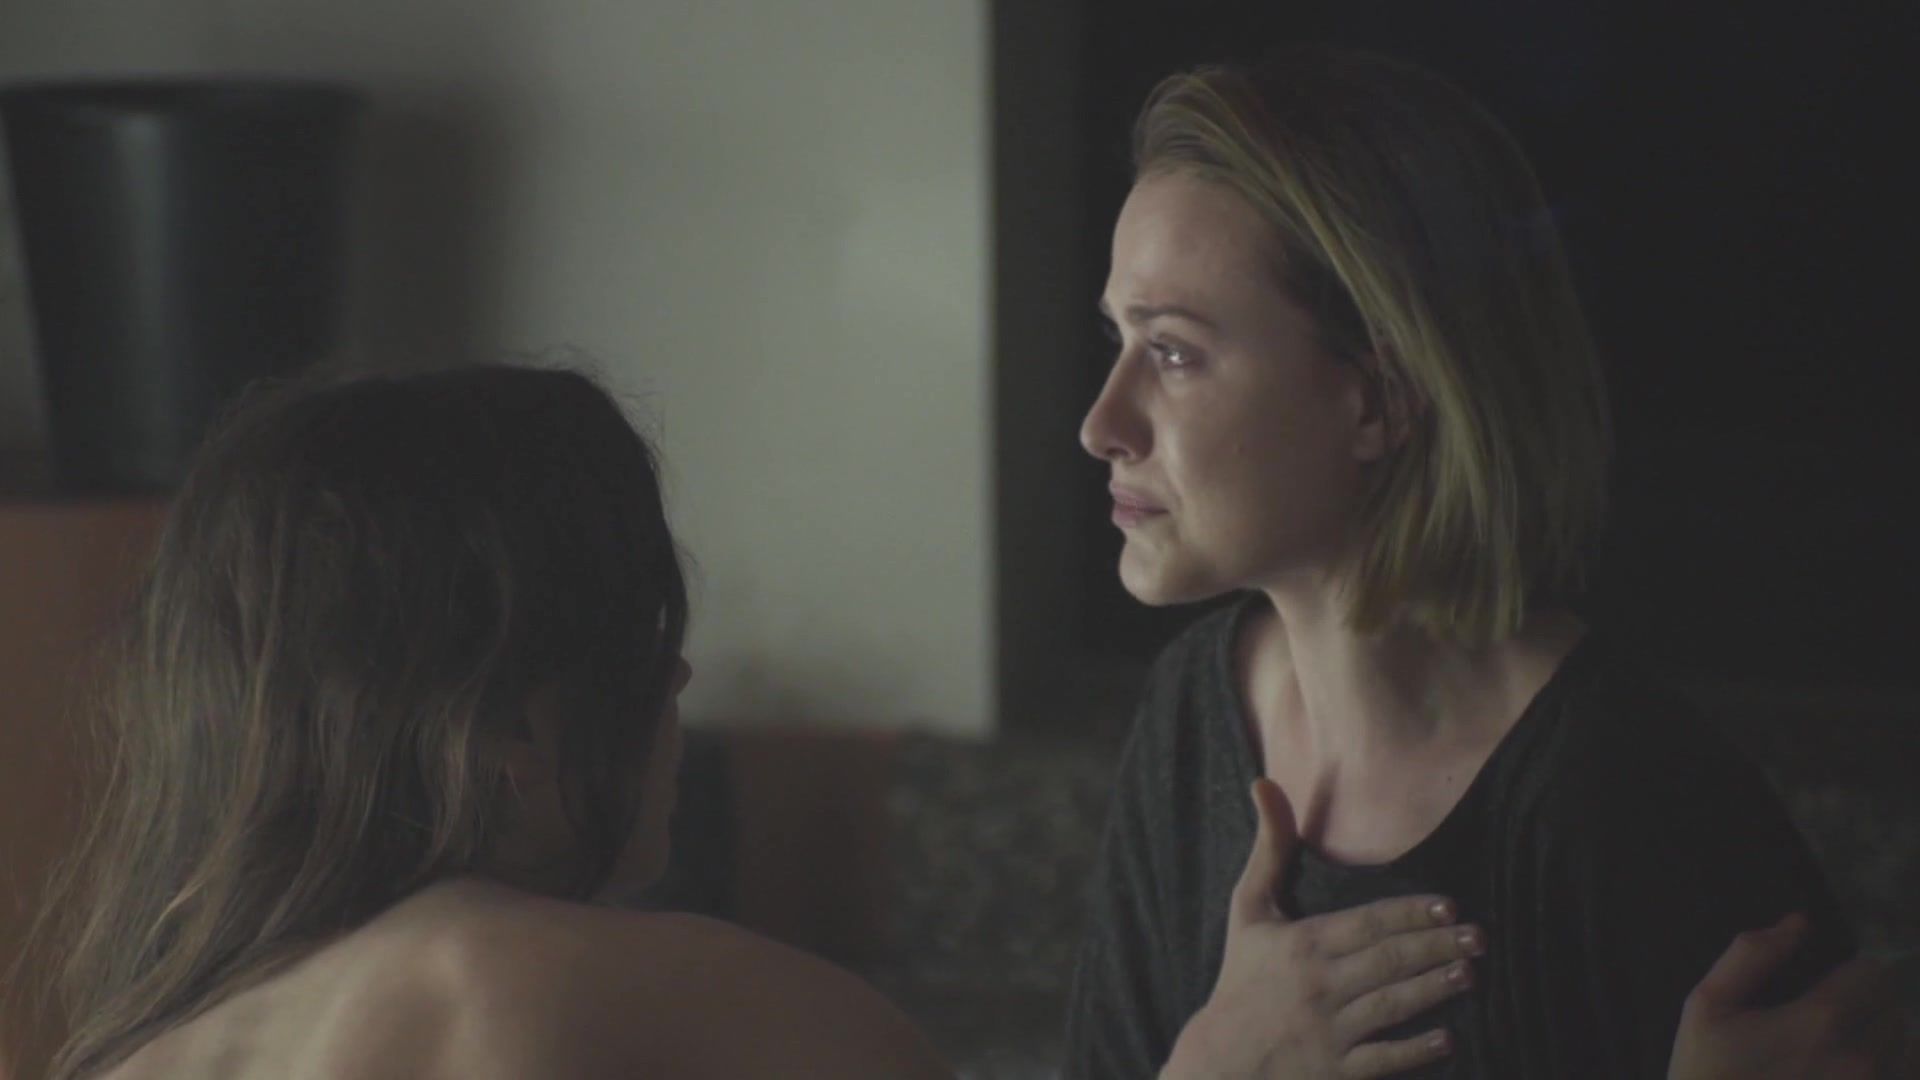 Anal Play Ellen Page, Evan Rachel Wood - Into The Forest (2015) (Sex, Topless) Lesbian - 1